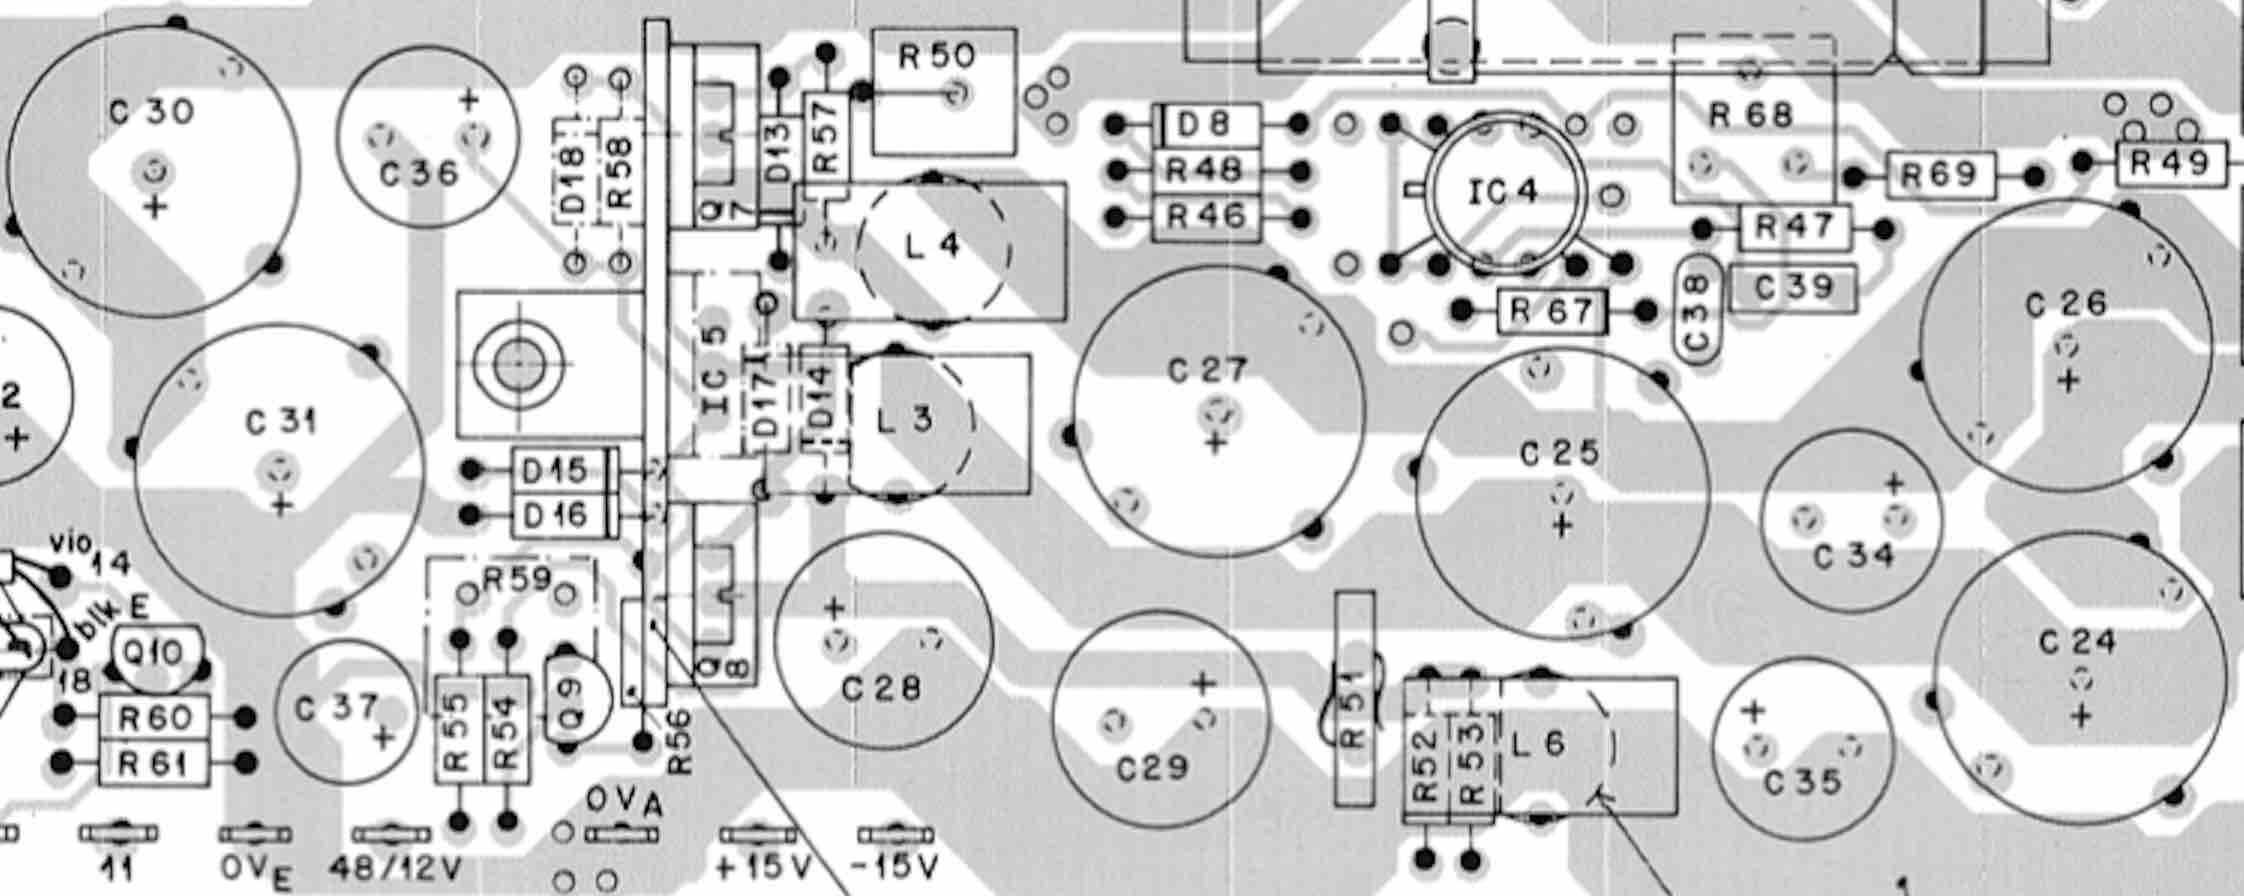 Studer 962 power supply physical layout caps tiny.jpg